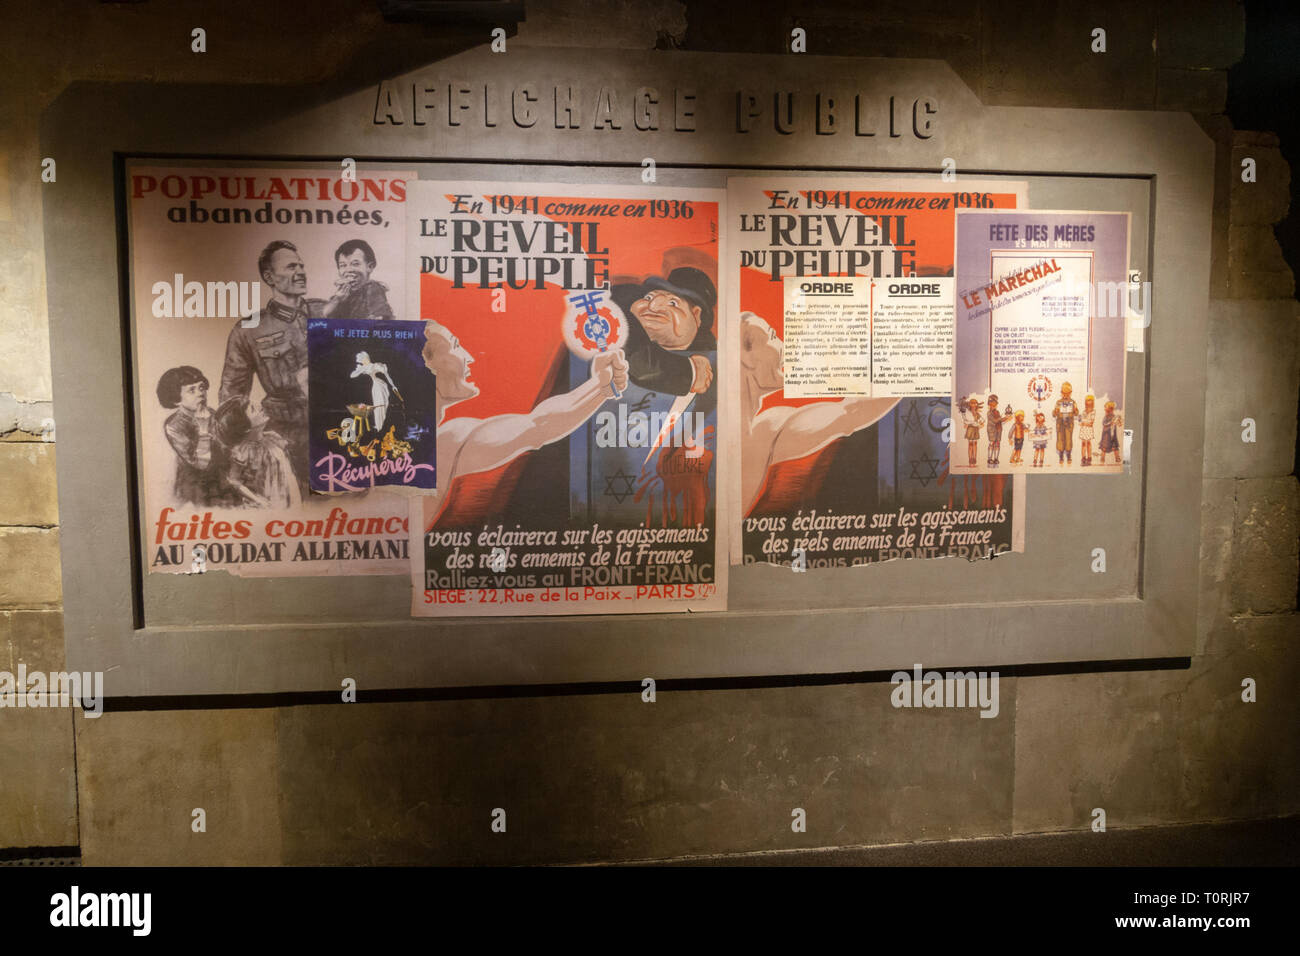 World War Two German propaganda posters urging the French to support the invading troops, Mémorial de Caen (Caen Memorial), Normandy, France. Stock Photo